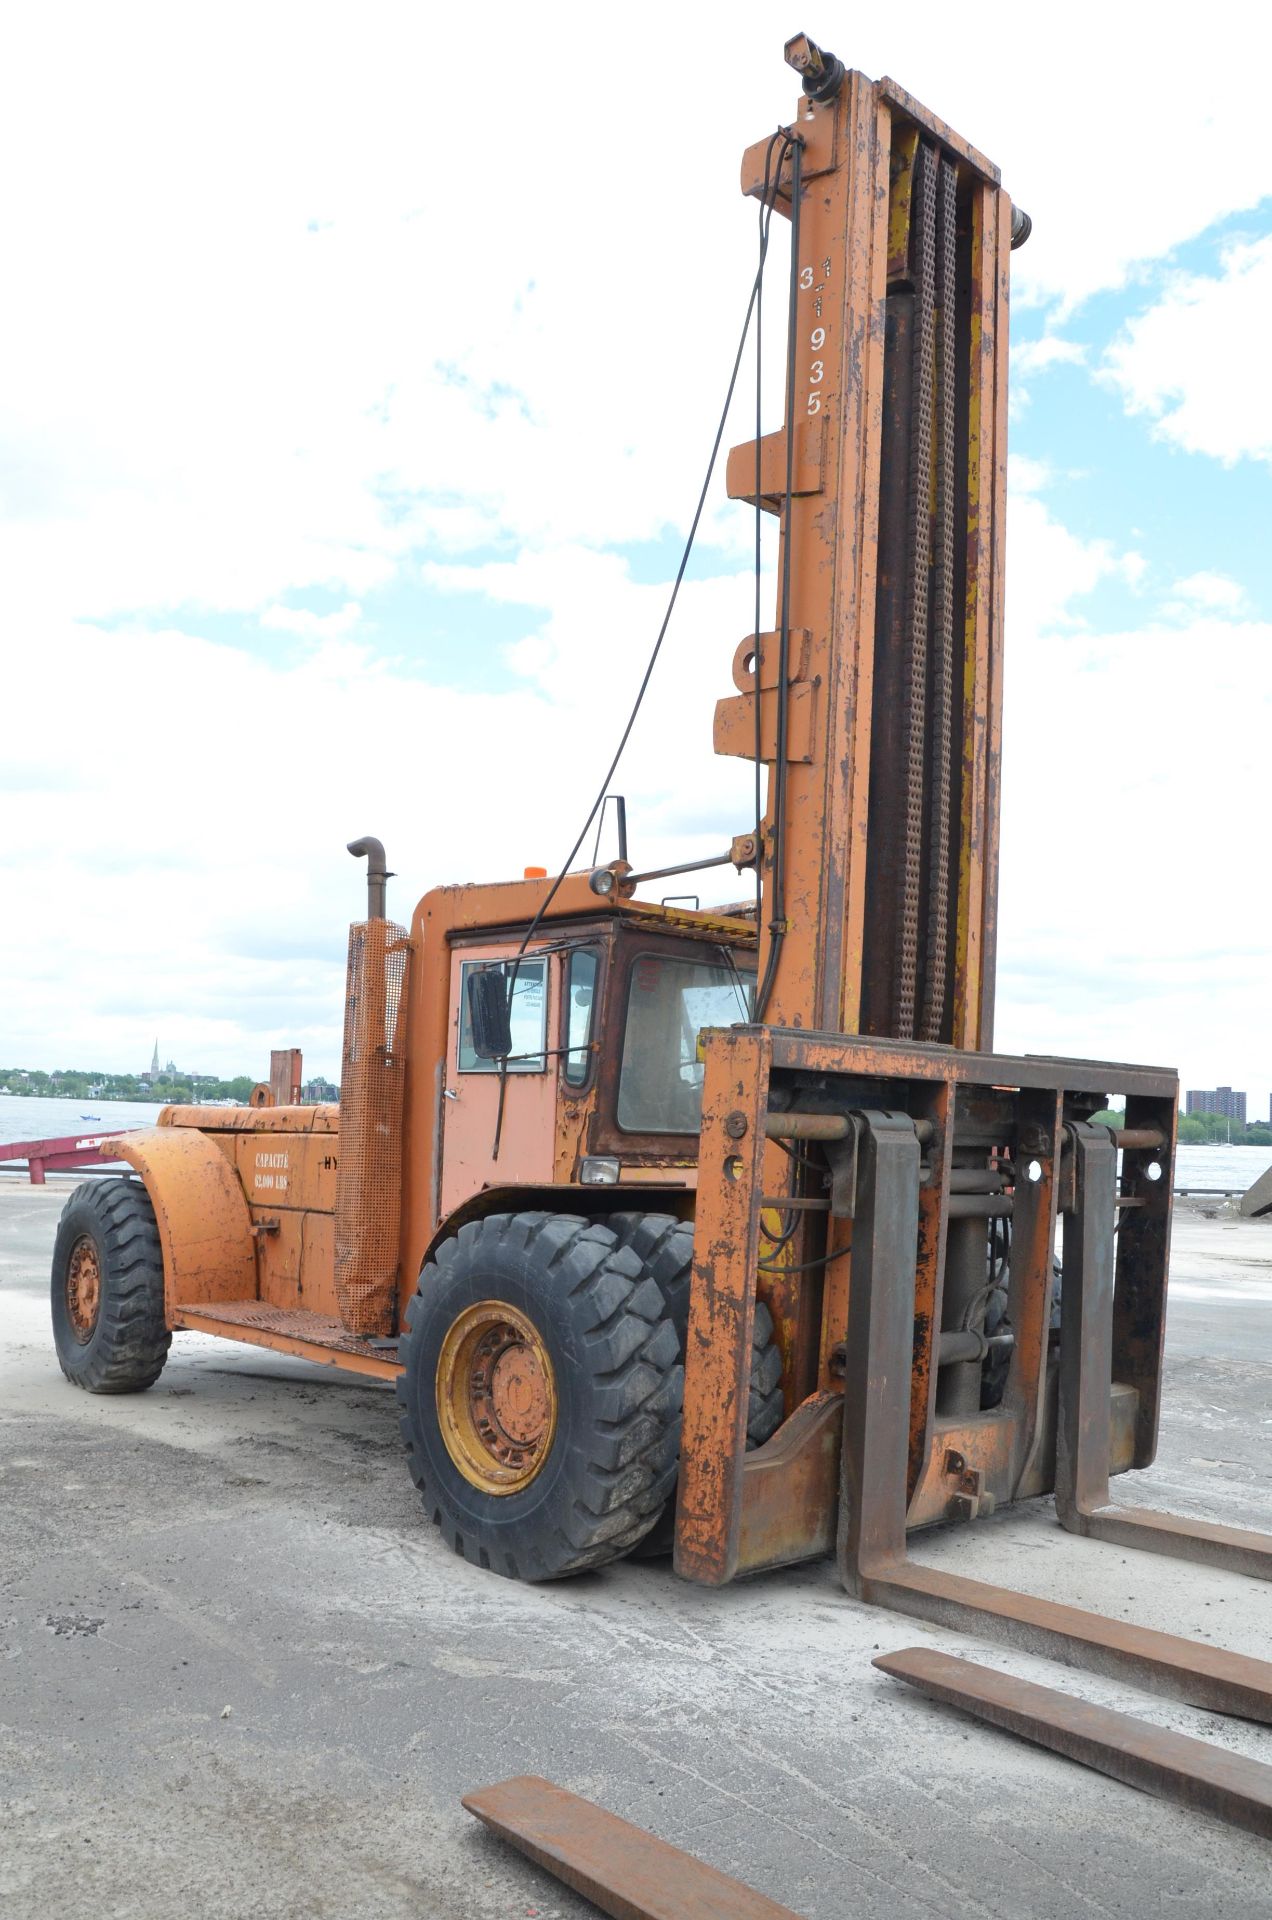 HYSTER H620B HEAVY DUTY OUTDOOR DIESEL FORKLIFT WITH 58,500 LBS. CAPACITY - Image 13 of 20